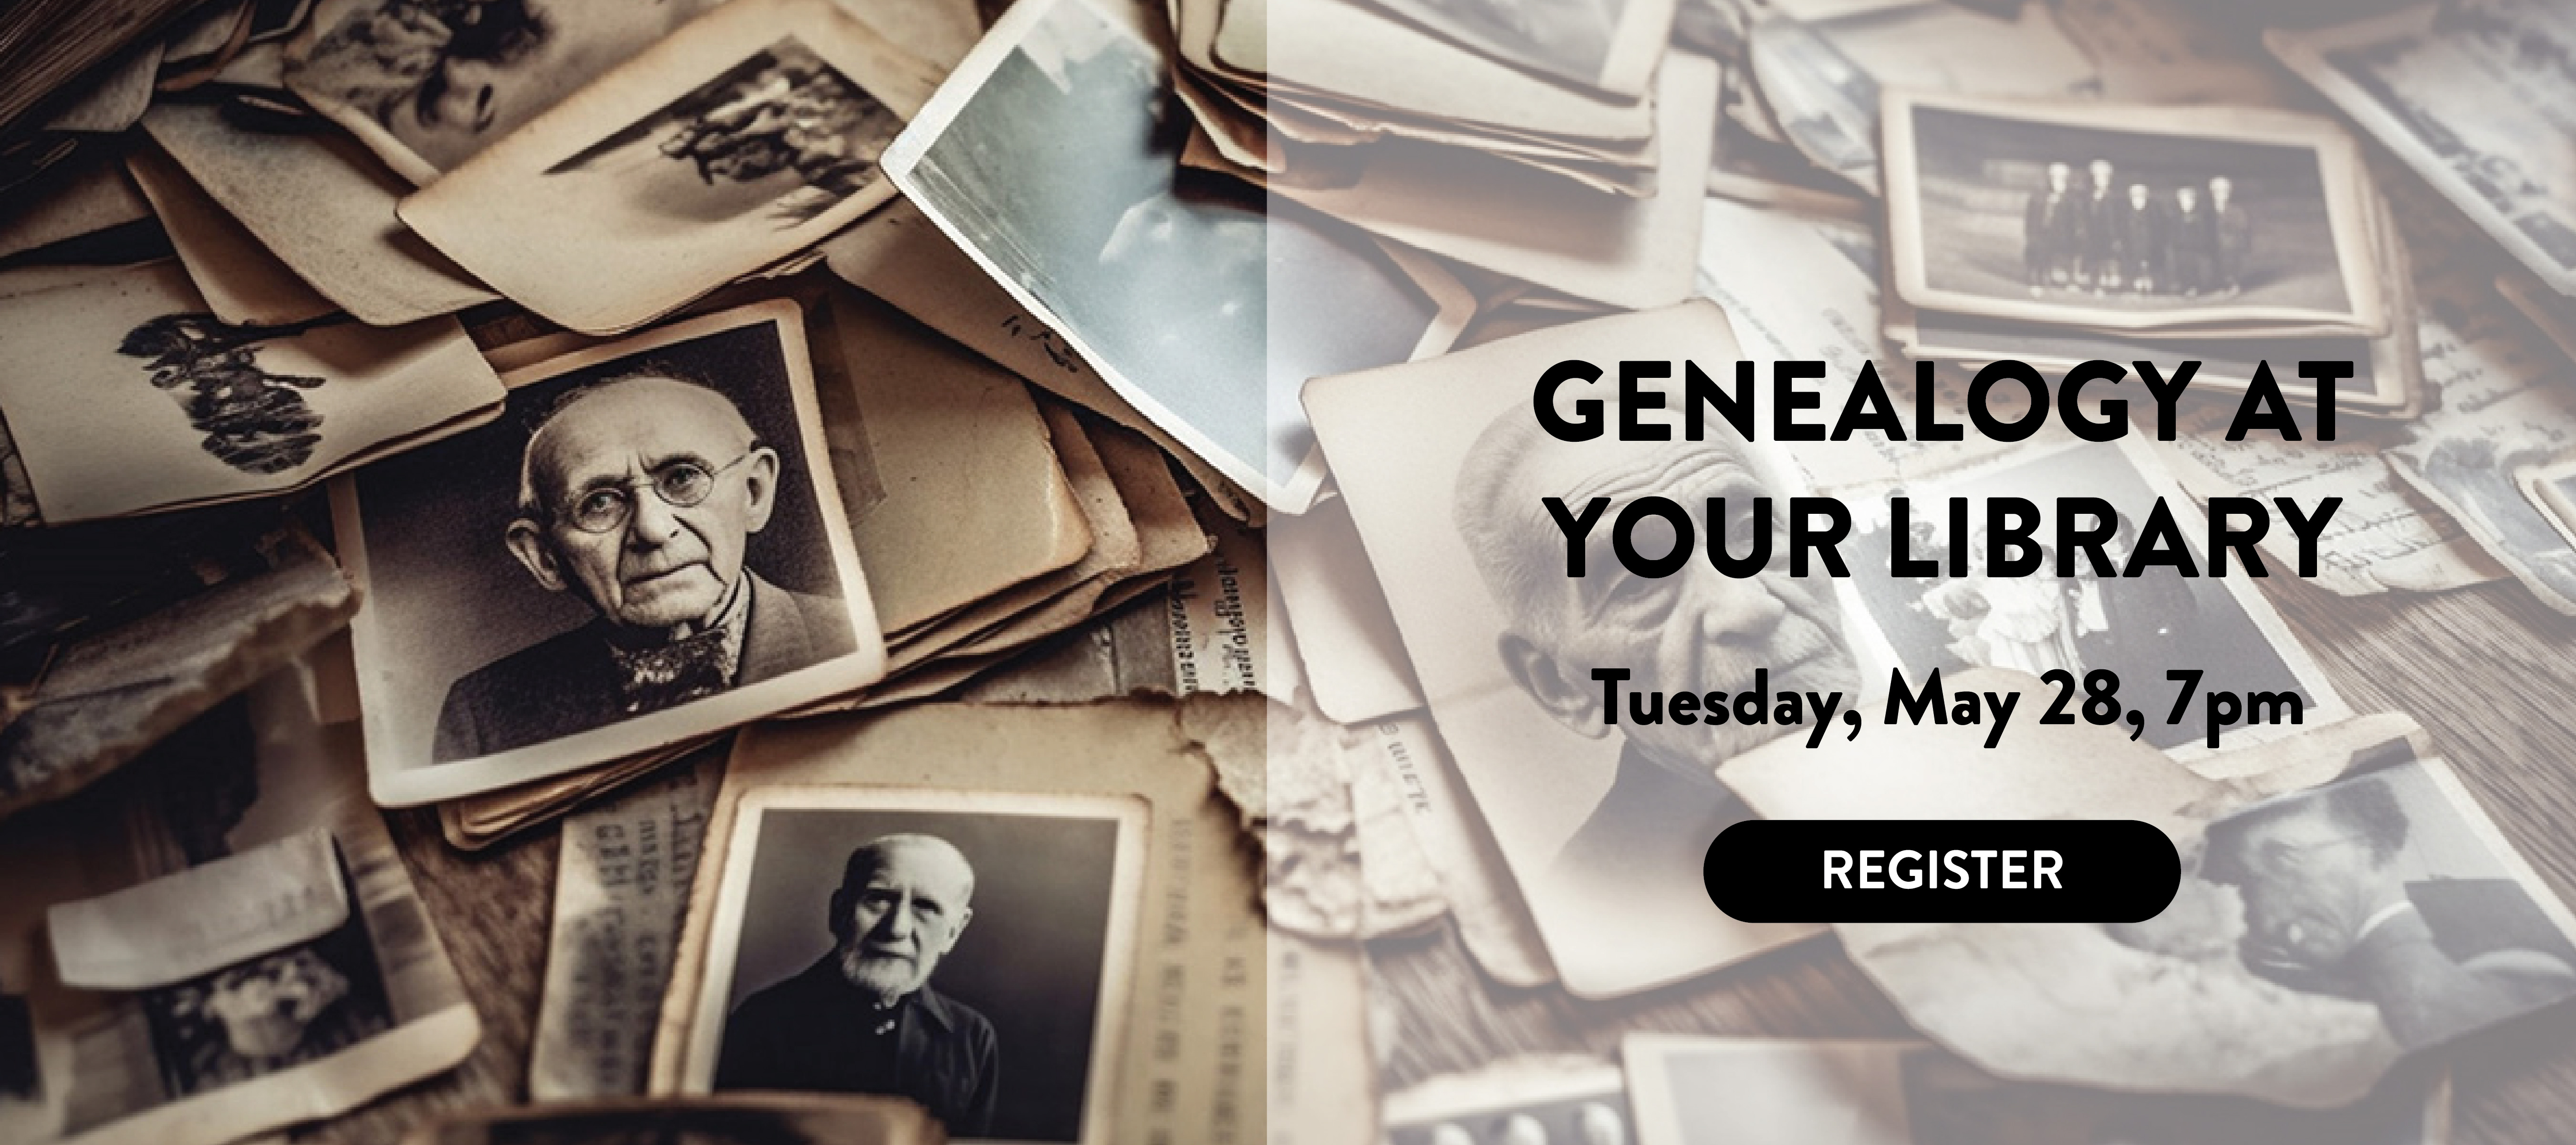 phpl, Prospect Heights Public Library, Genealogy at your Library, history, family connections, find your ancestors, family history research, Adult